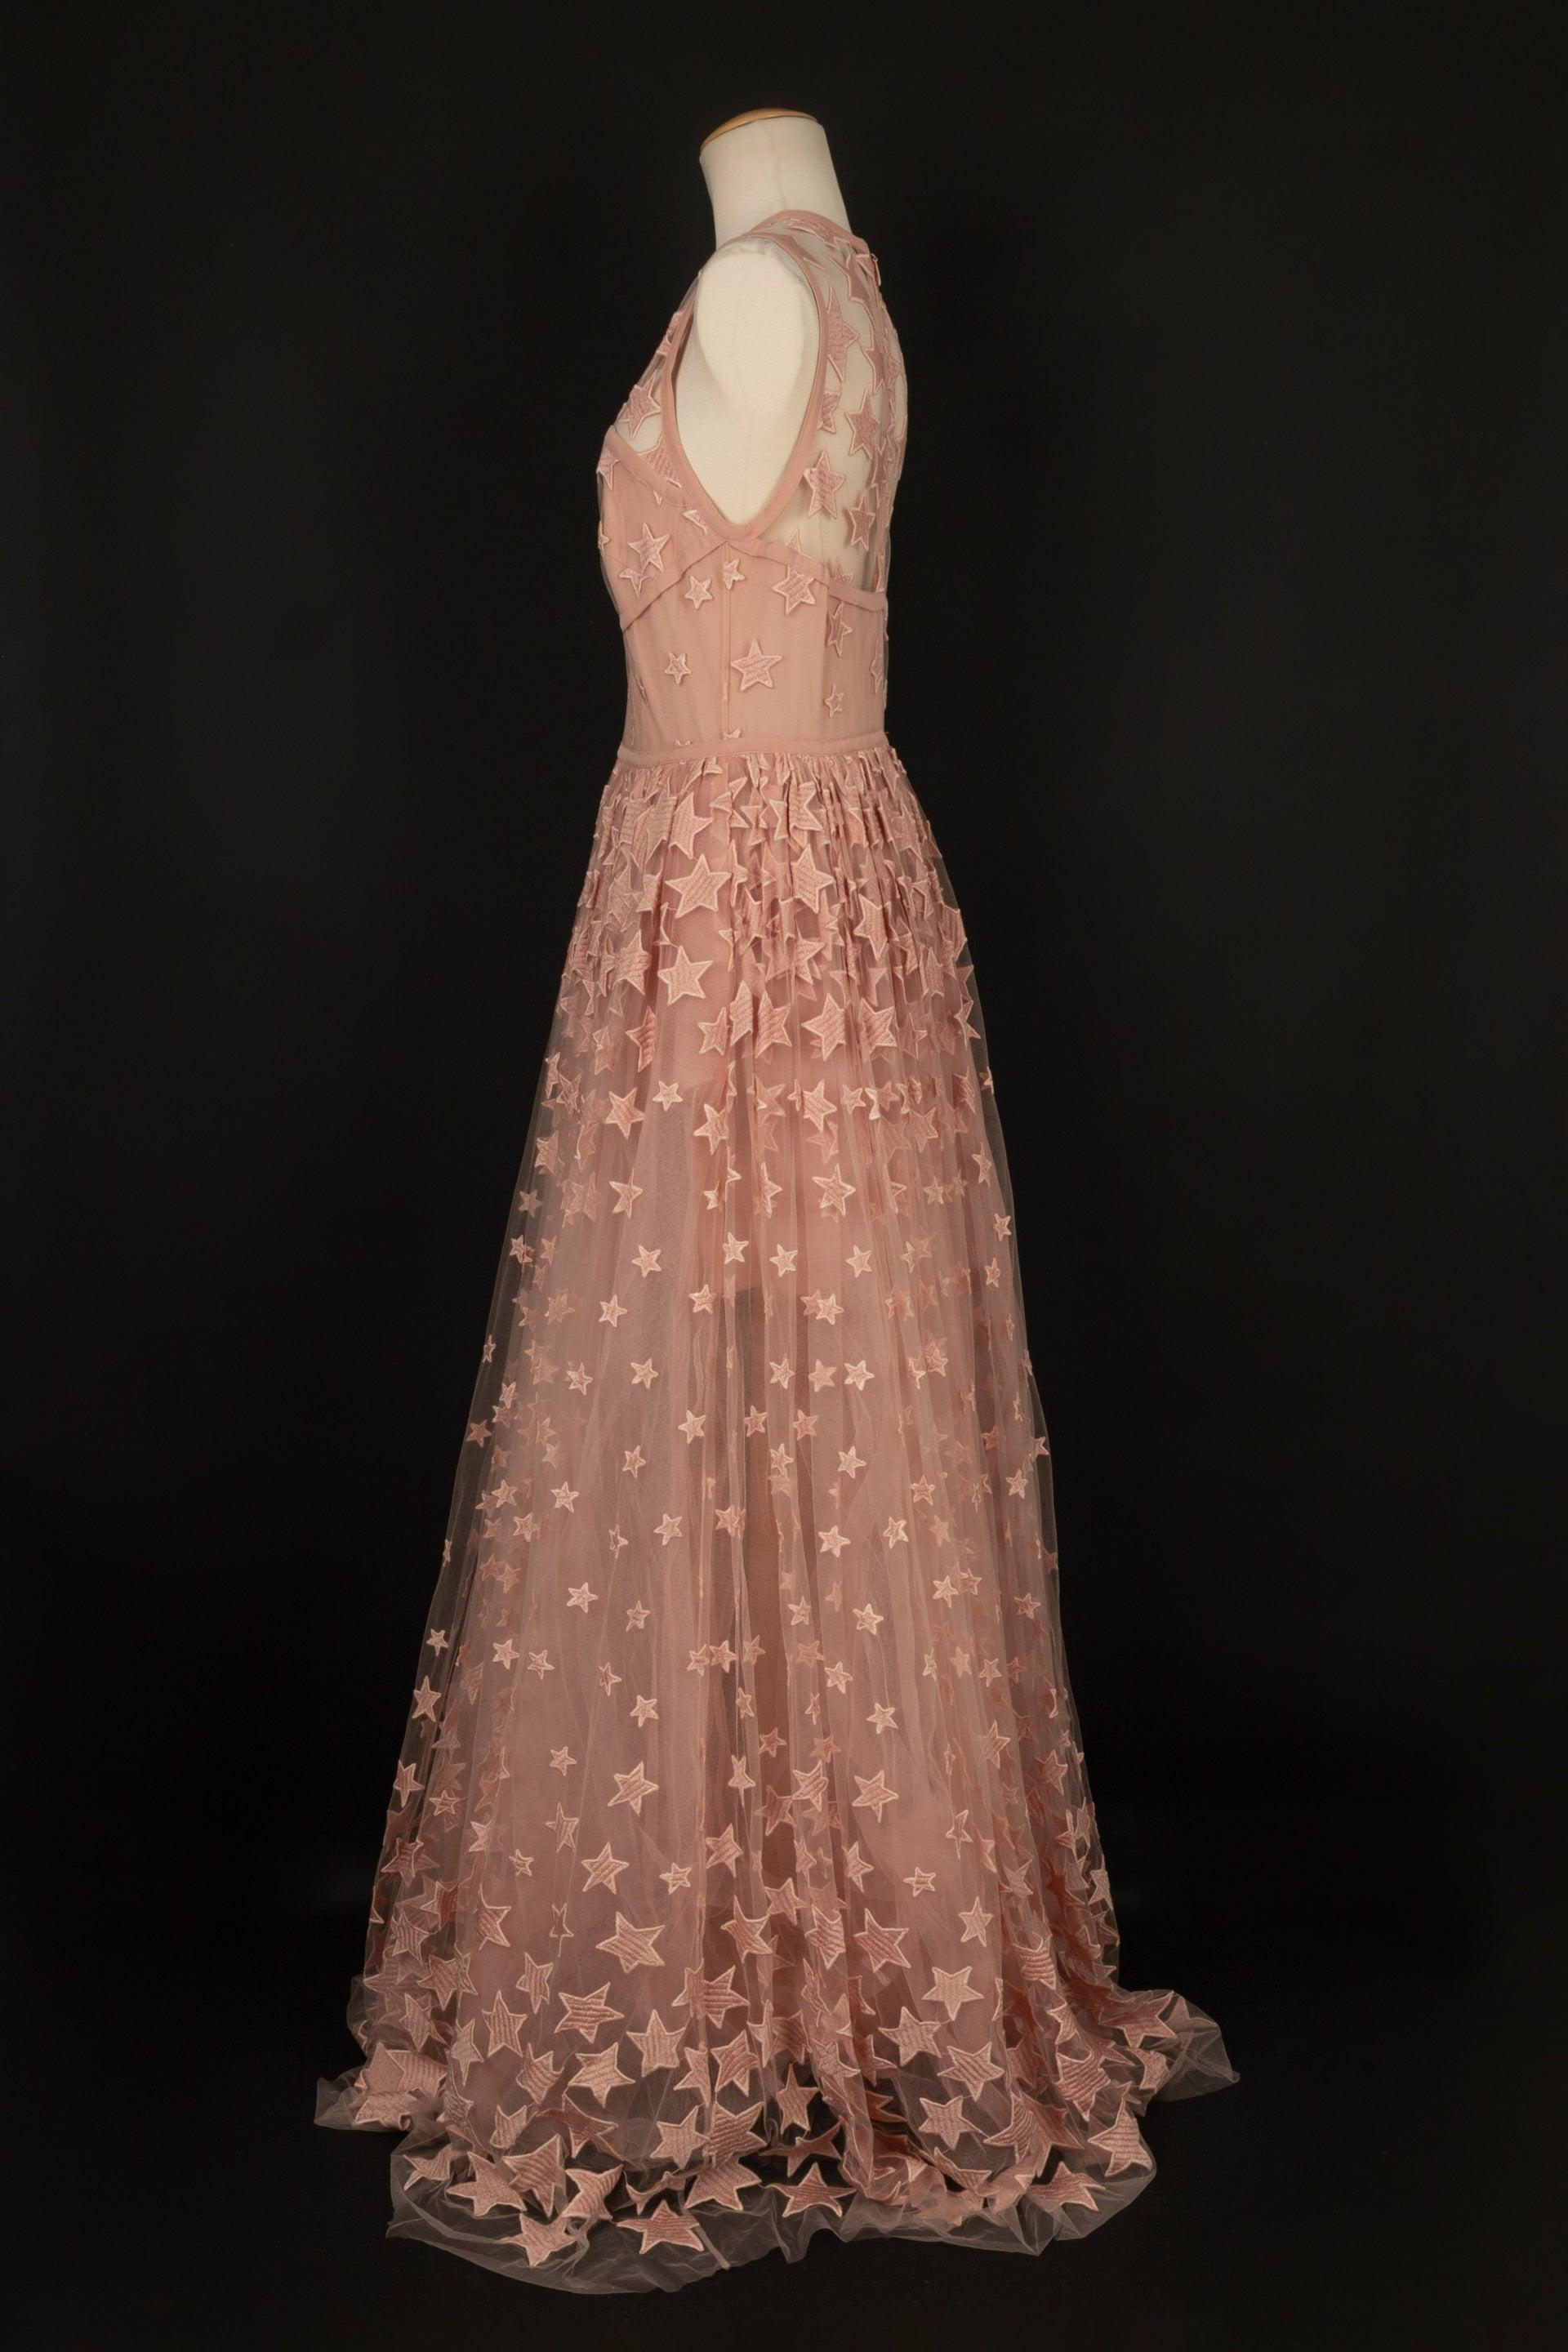 Elie Saab - Pink tulle long dress decorated with stars. No size indicated, it fits a 38FR.

Additional information:
Condition: Very good condition
Dimensions: Chest: 44 cm
Waist: 37 cm
Length: 180 cm

Seller reference: VR120